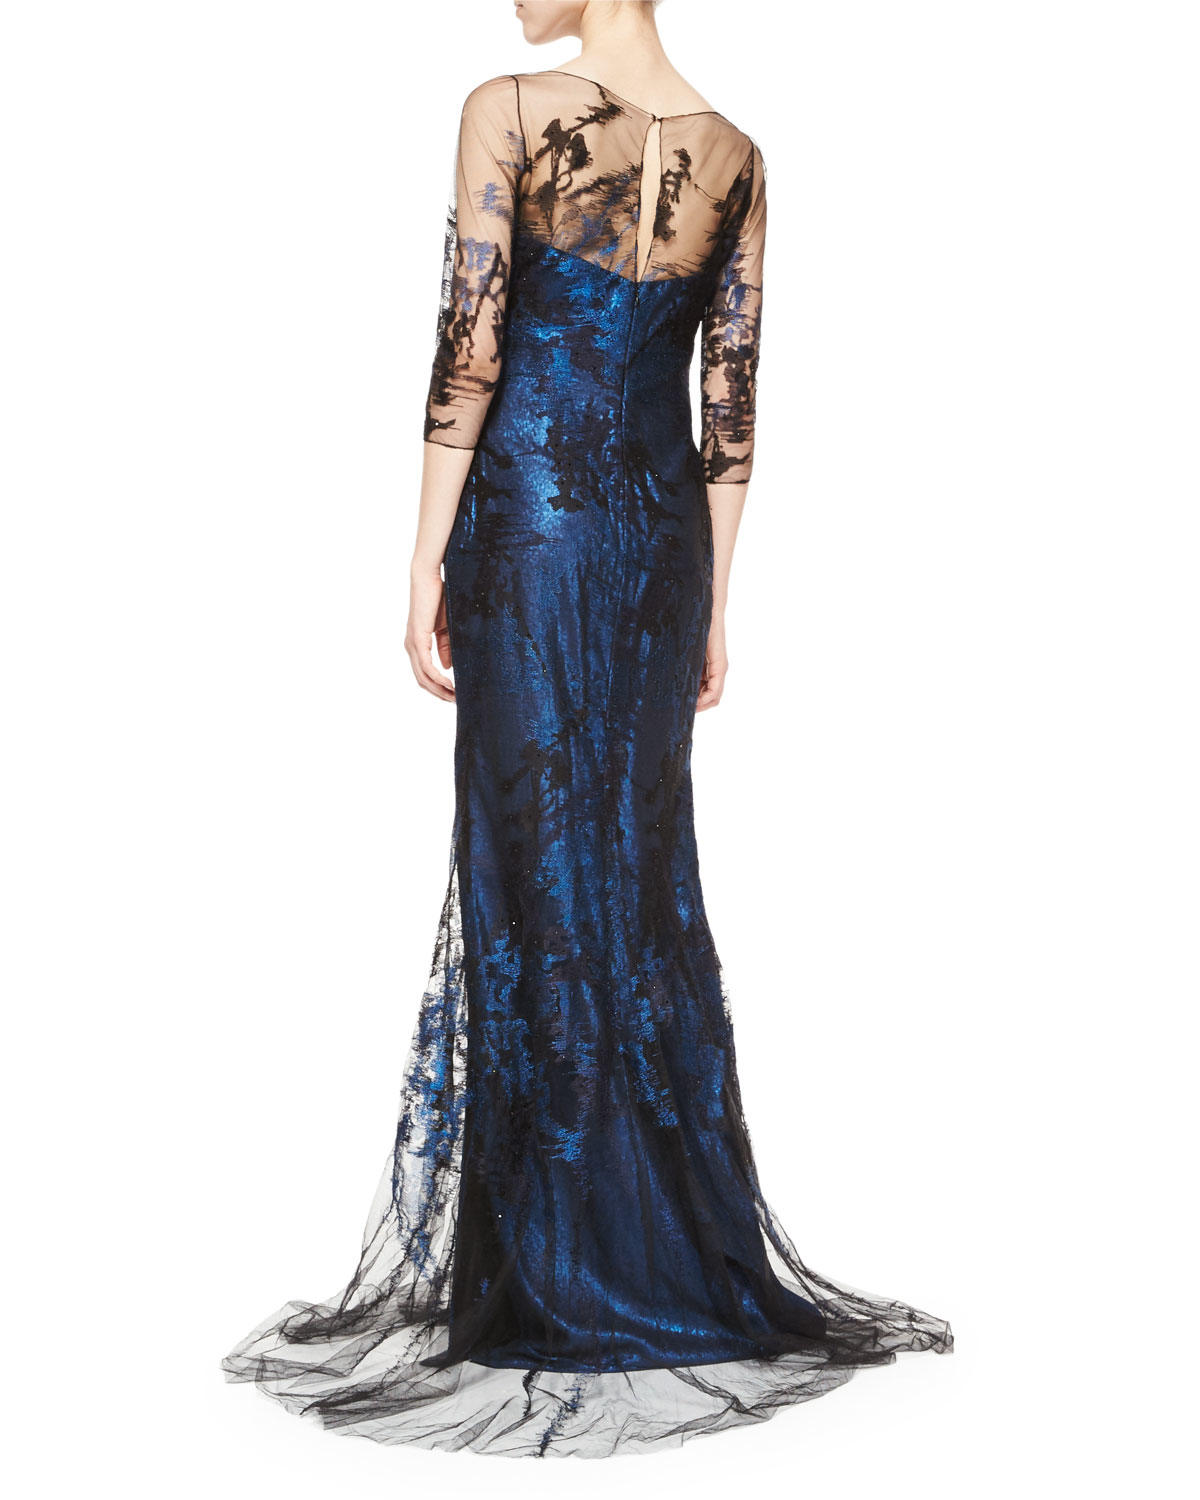 Lyst - Rene Ruiz 3/4-Sleeve Illusion Lace Gown in Blue